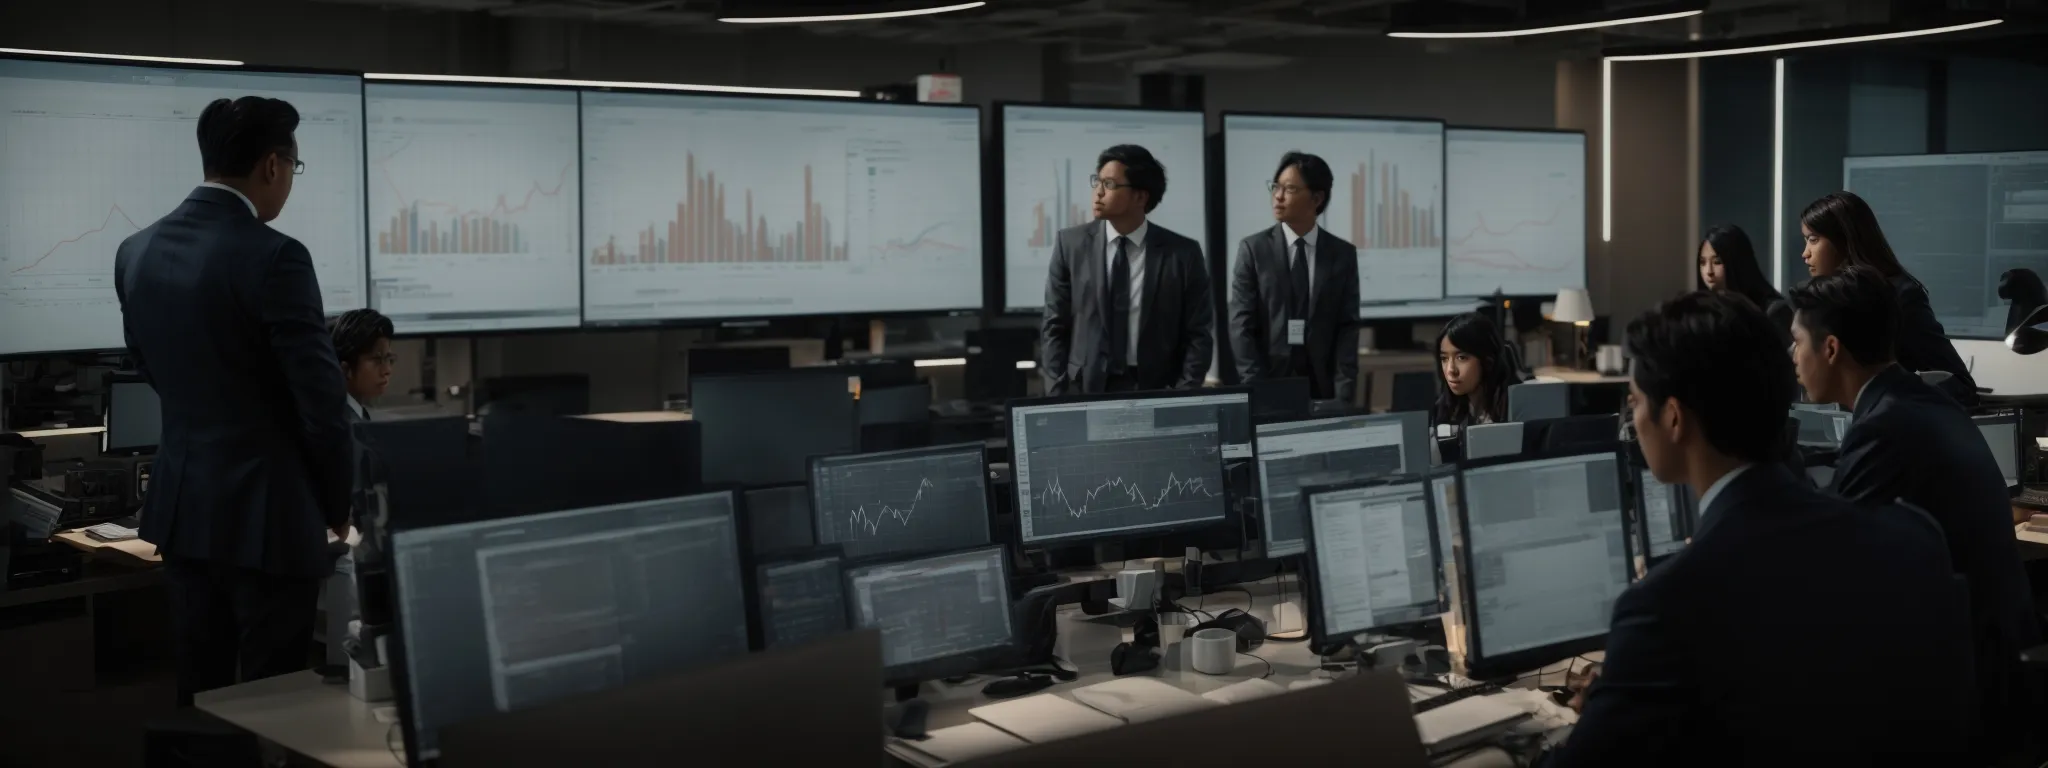 a group of professionals scrutinizes charts and graphs on a large monitor in a modern office.